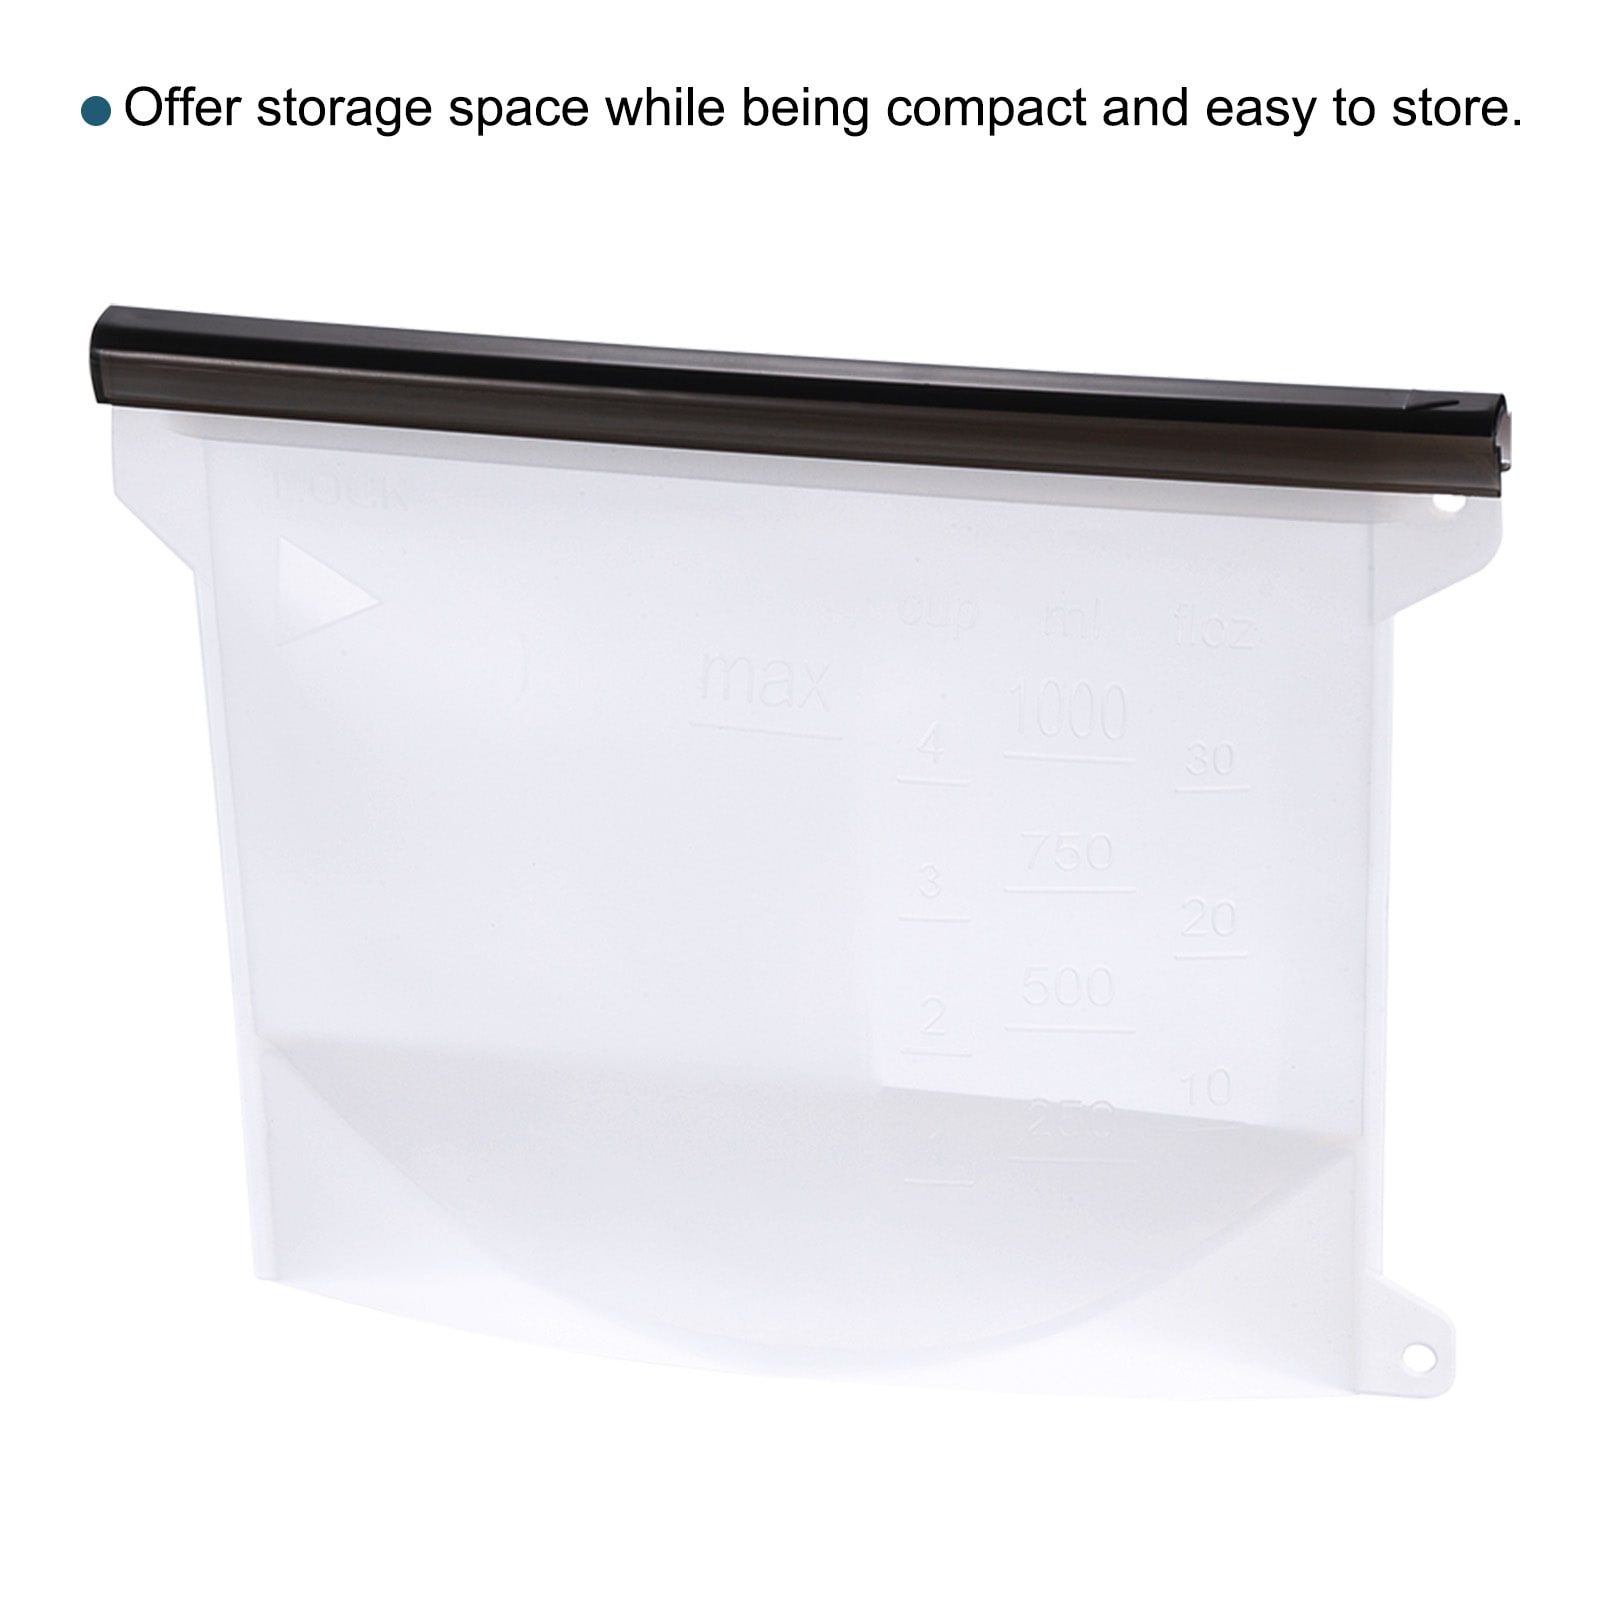 https://ak1.ostkcdn.com/images/products/is/images/direct/49c640a05df6b3cd86c319227af2d862ddd72266/Reusable-Silicone-Food-Fresh-Bags-Gallon-Freezer-Bags-White%2BSealing-Straps.jpg